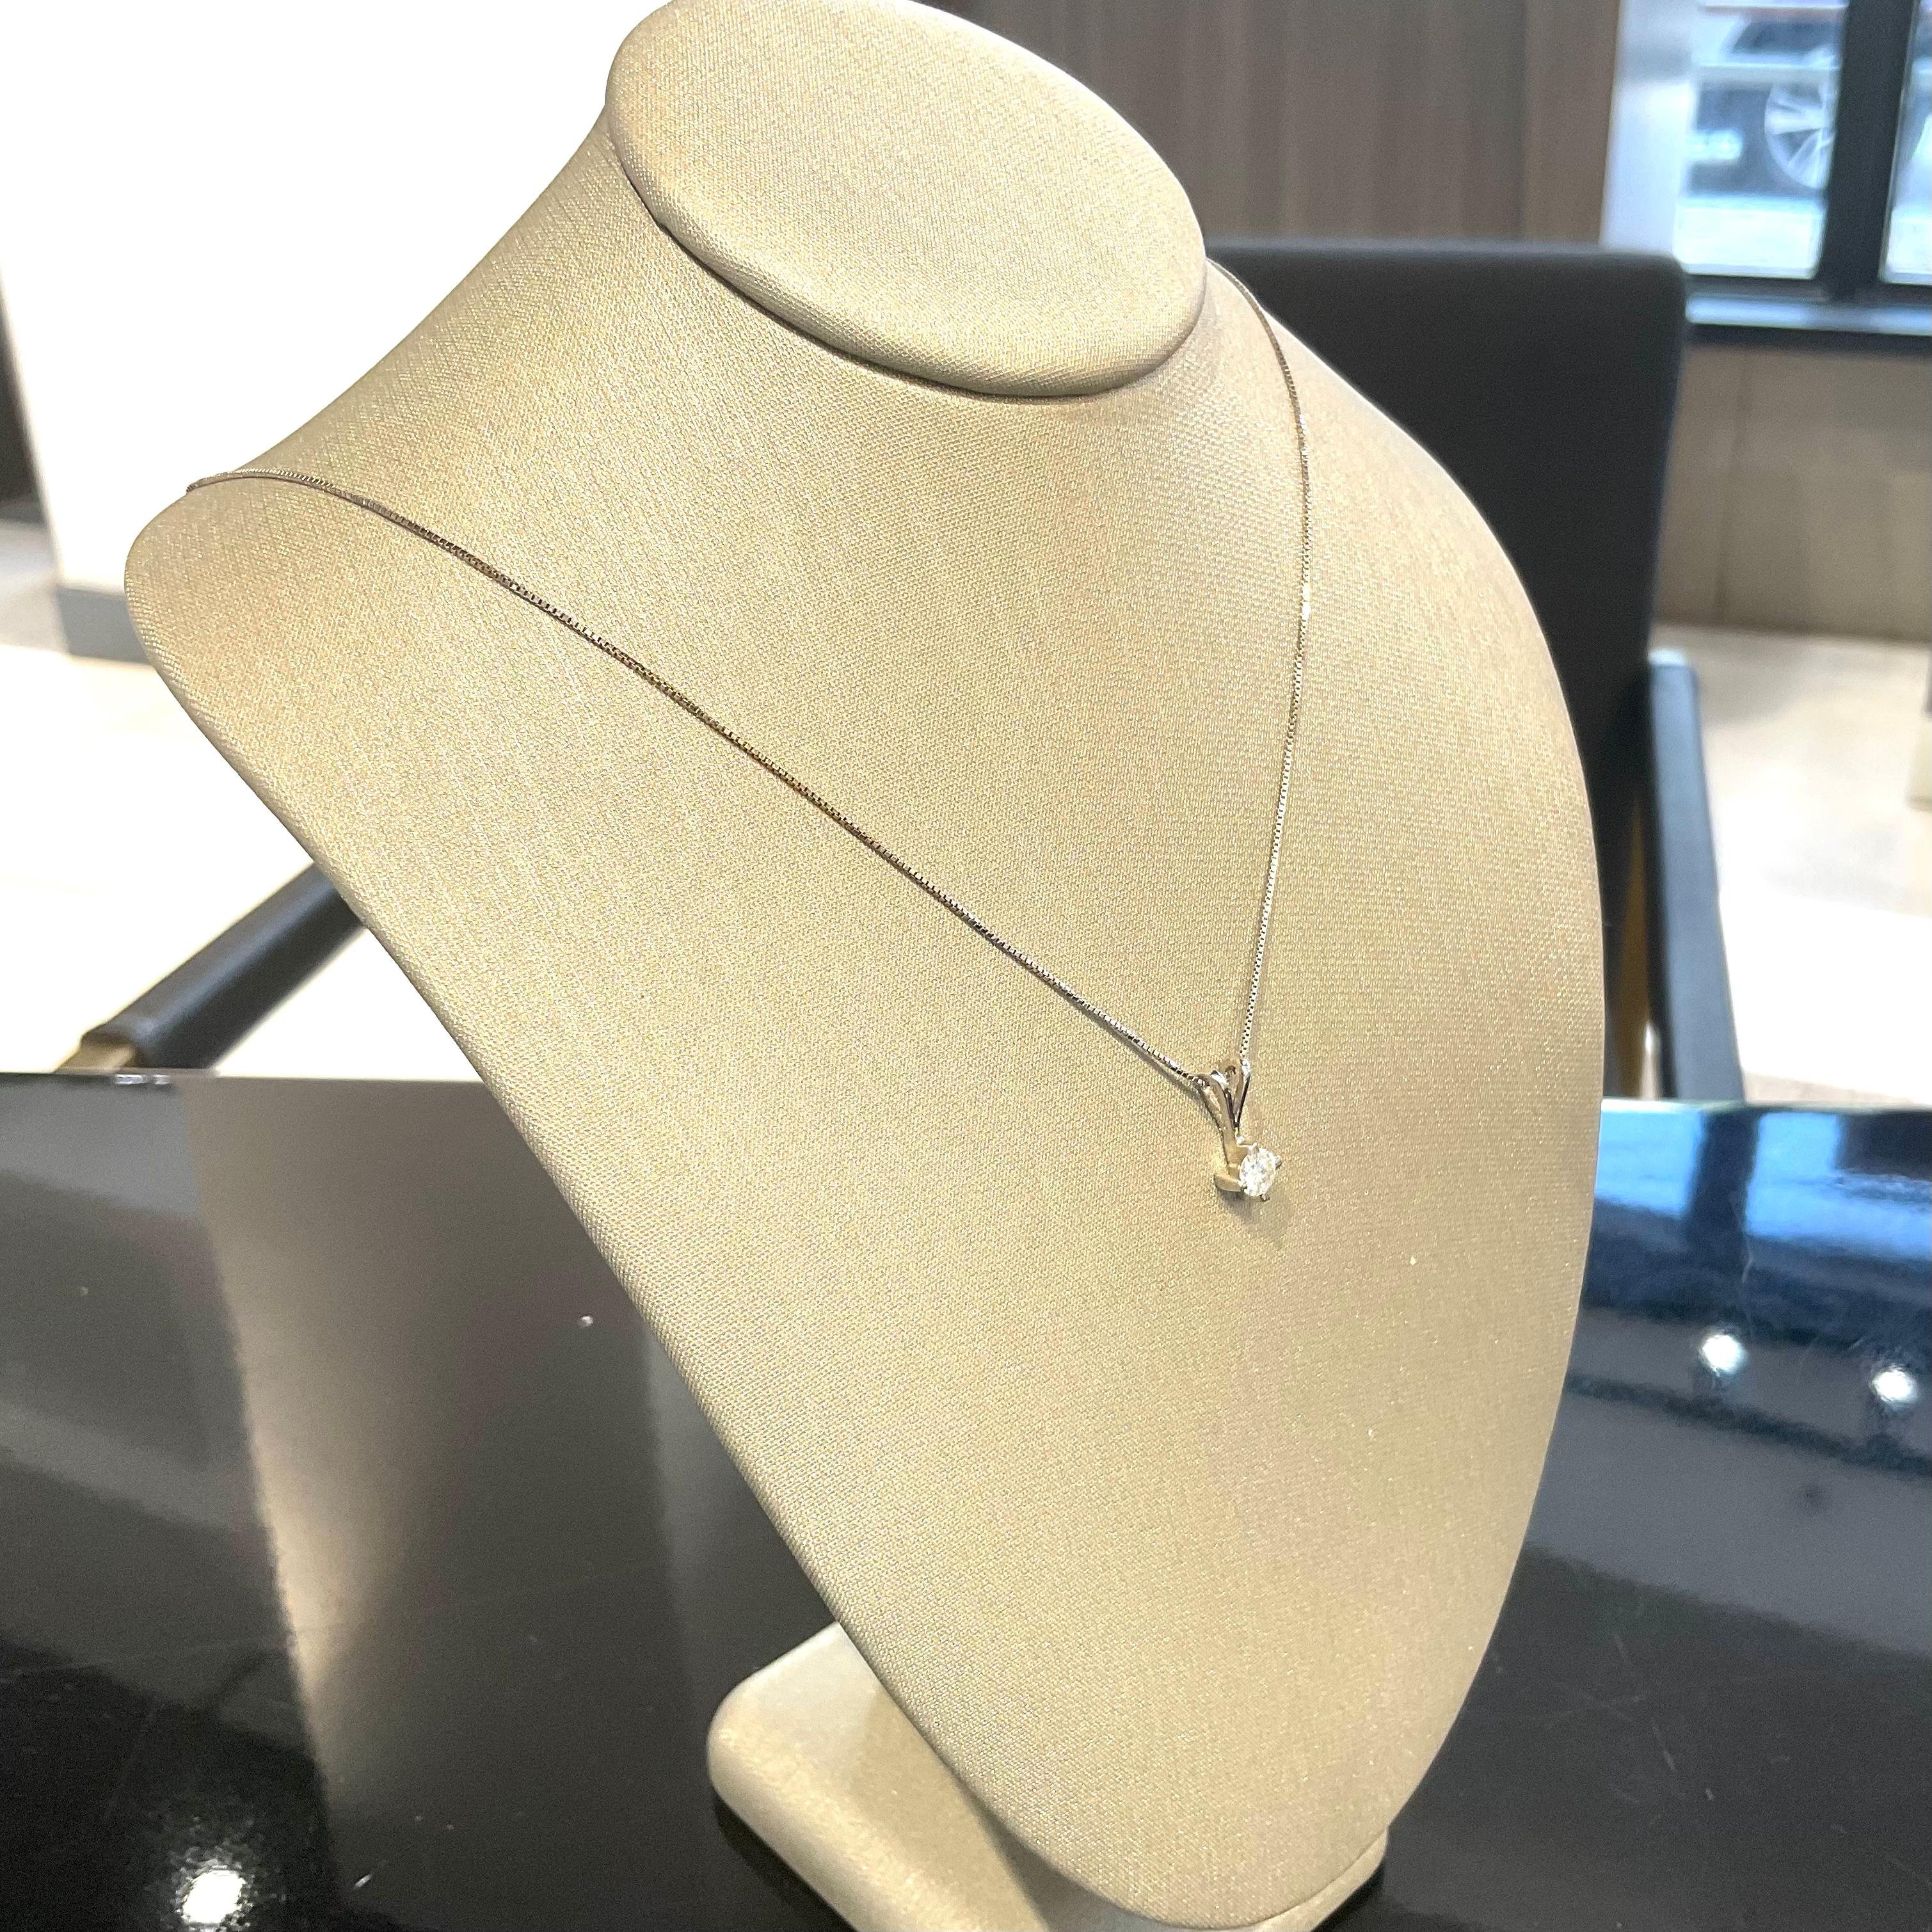 Style: Solitaire Diamond Pendant Necklace
Metal: White  Gold 
Metal Purity: 14K
Stones: Diamonds​​​​​​​
Diamond Clarity: VSI
Diamond Color: G
Total Carat Weight: 0.25 ct 
Necklace Length: 15 in 
Total Weight: 1.6 g
Includes: 24 Month Brilliance